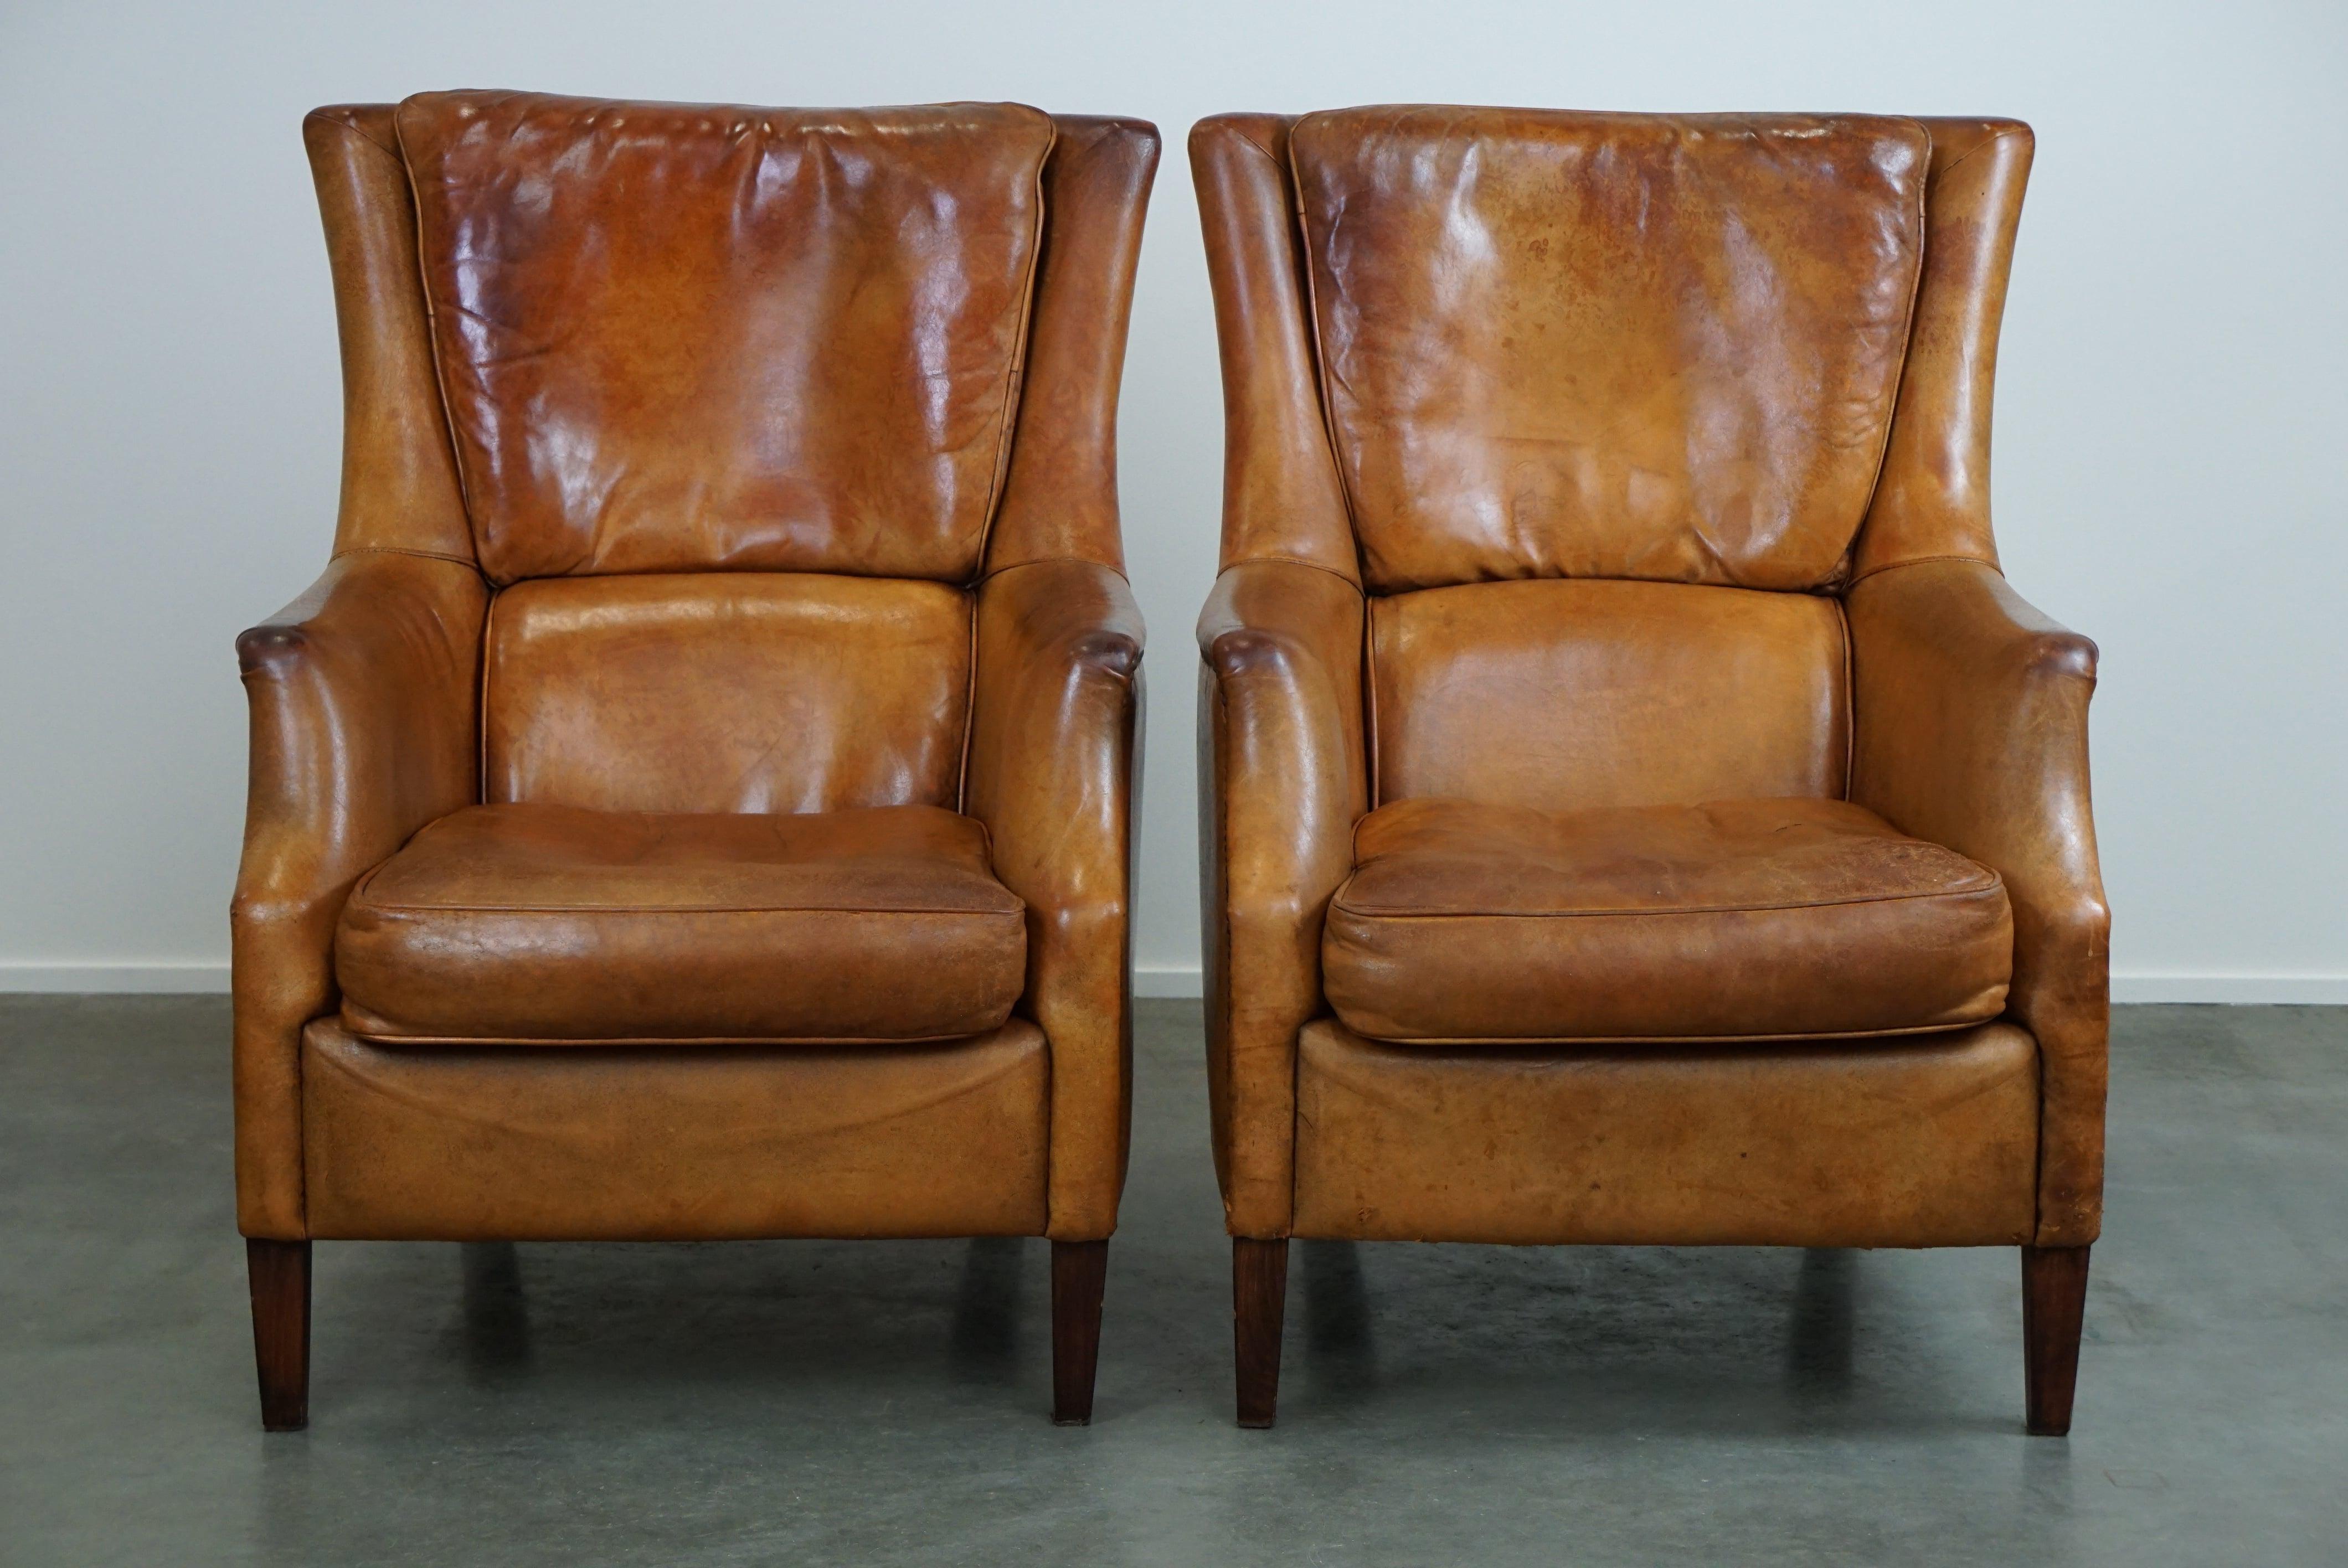 Offered: this set of two super rugged and very comfortable sheep leather armchairs with a beautiful patina.

Despite their rugged appearance, they will embrace you with their amazing comfort and quality. These are the perfect armchairs to sink into